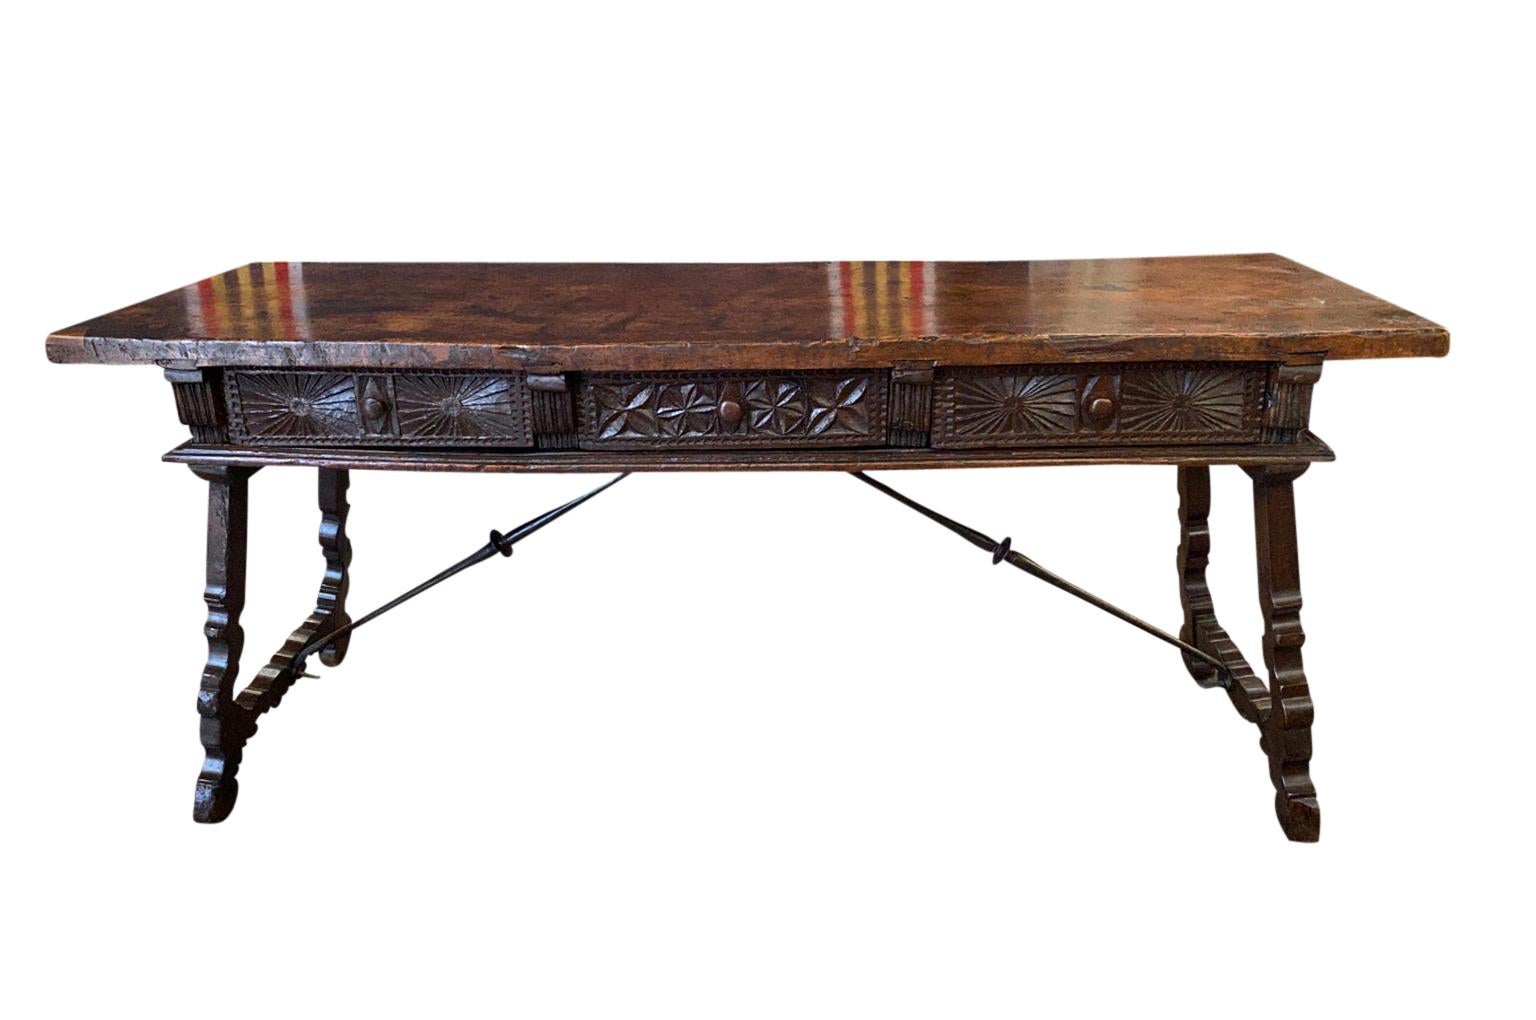 An outstanding 17th century Spanish Reflectoire Table - Writing Desk beautifully constructed from handsome walnut in the Renaissance taste.  Tremendous solid board top, carved drawer fascias, lyre shaped legs and hand forged iron stretchers.  A very